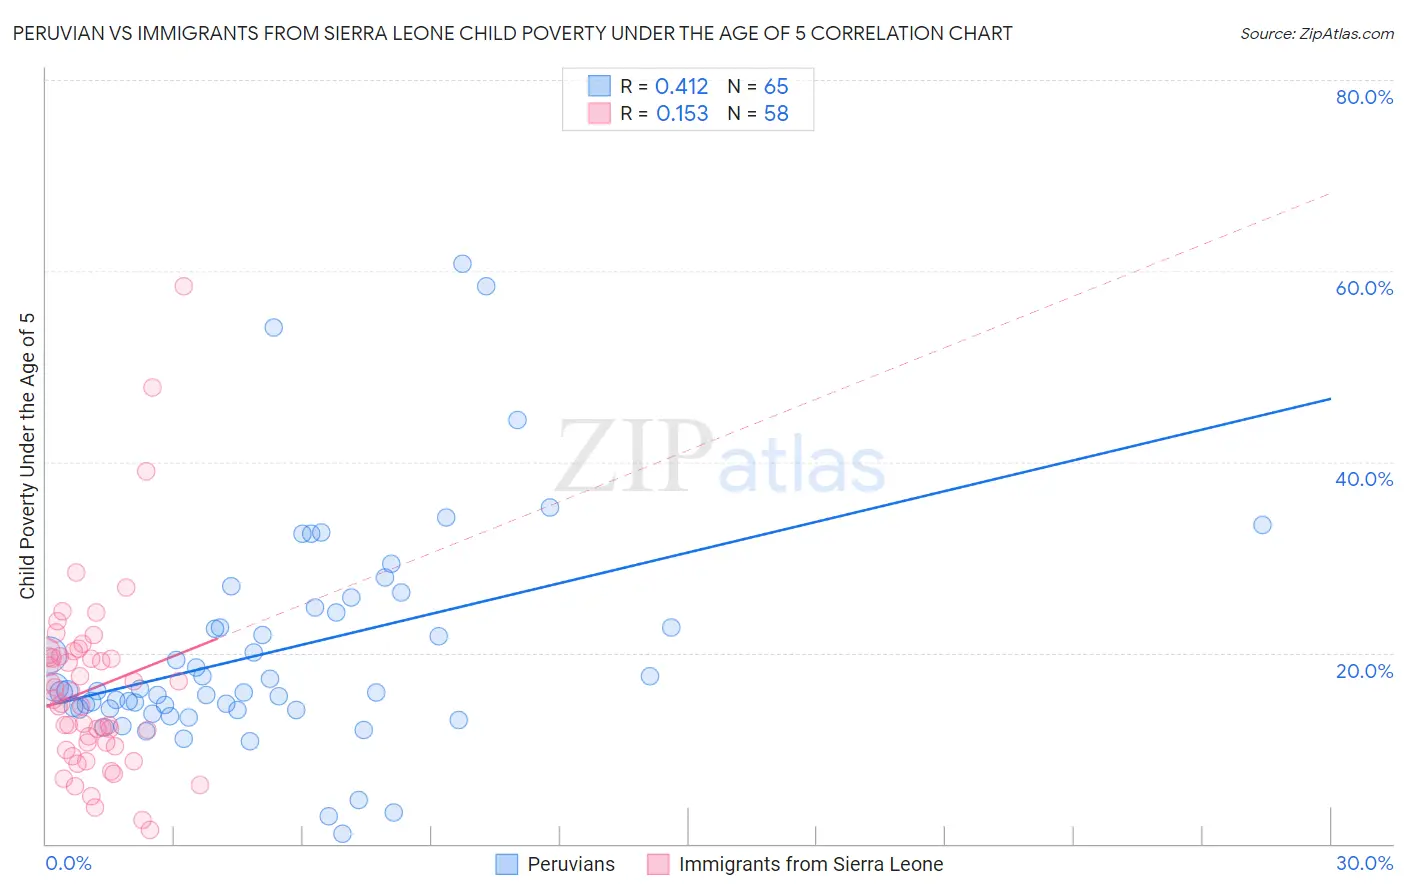 Peruvian vs Immigrants from Sierra Leone Child Poverty Under the Age of 5